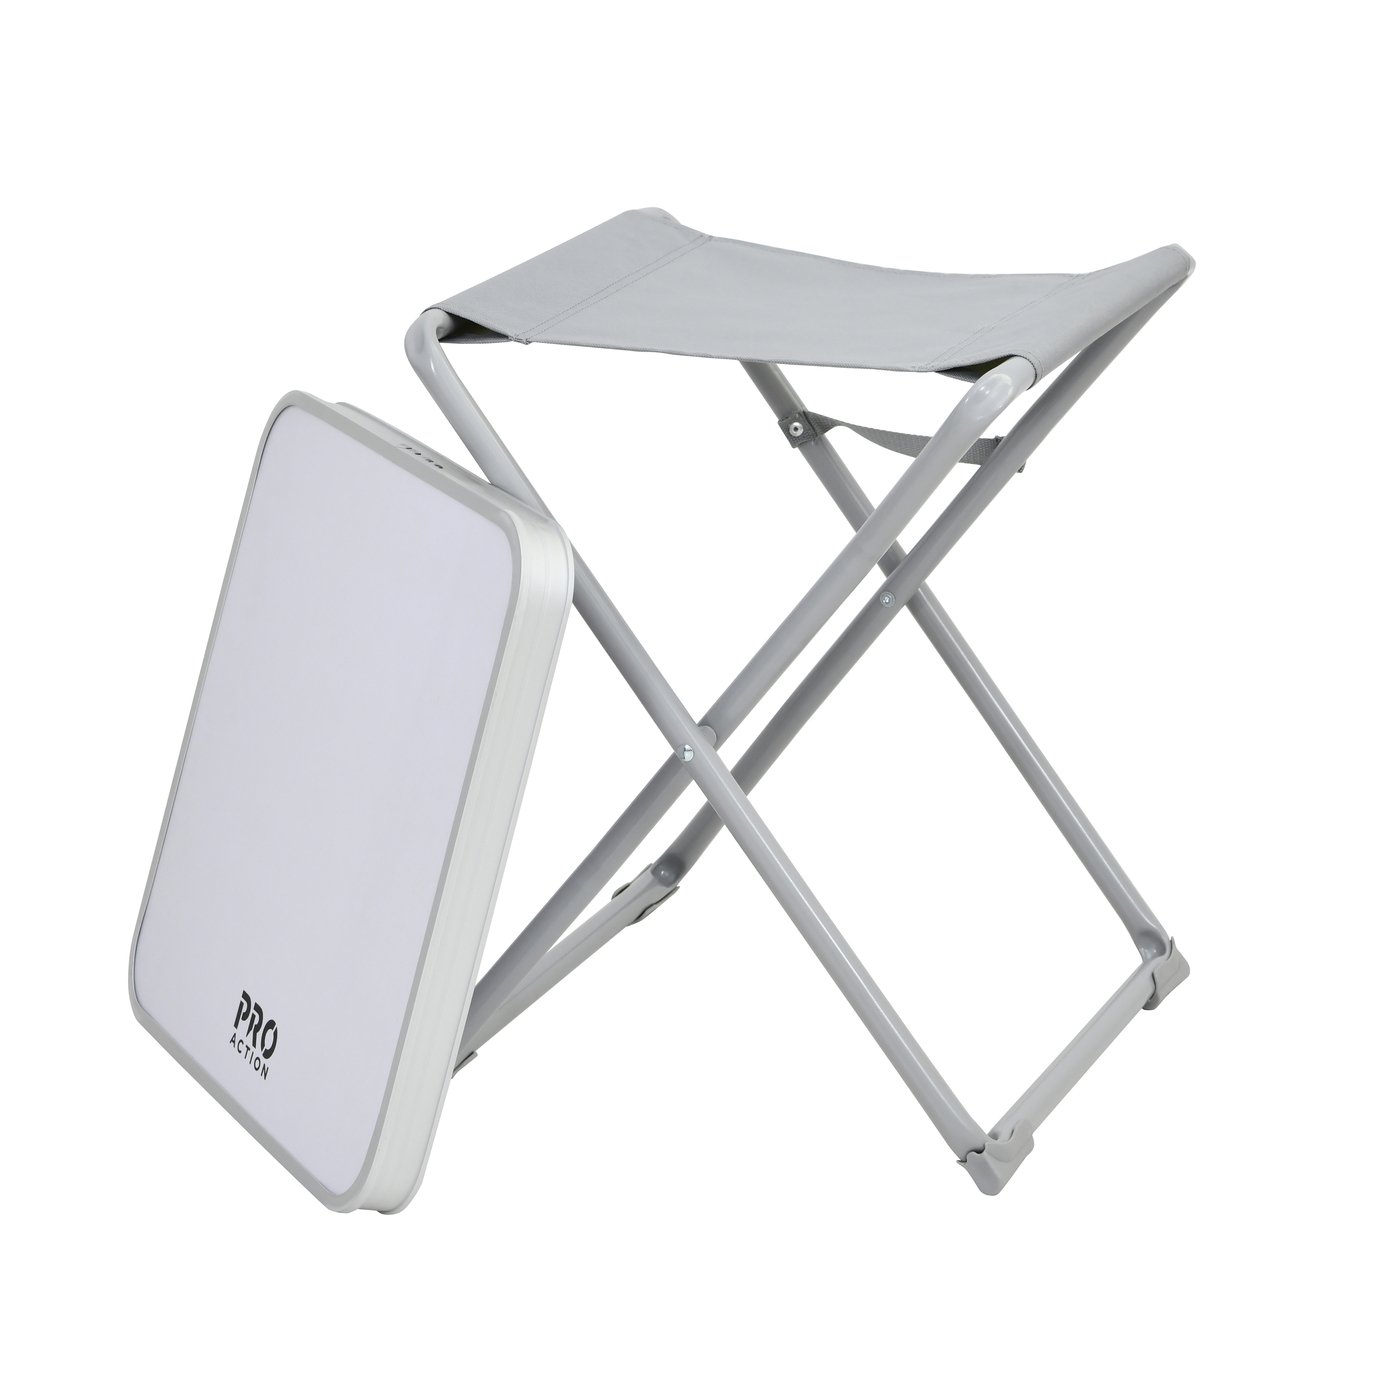 ProAction 2 in 1 Camping Stool and Table review